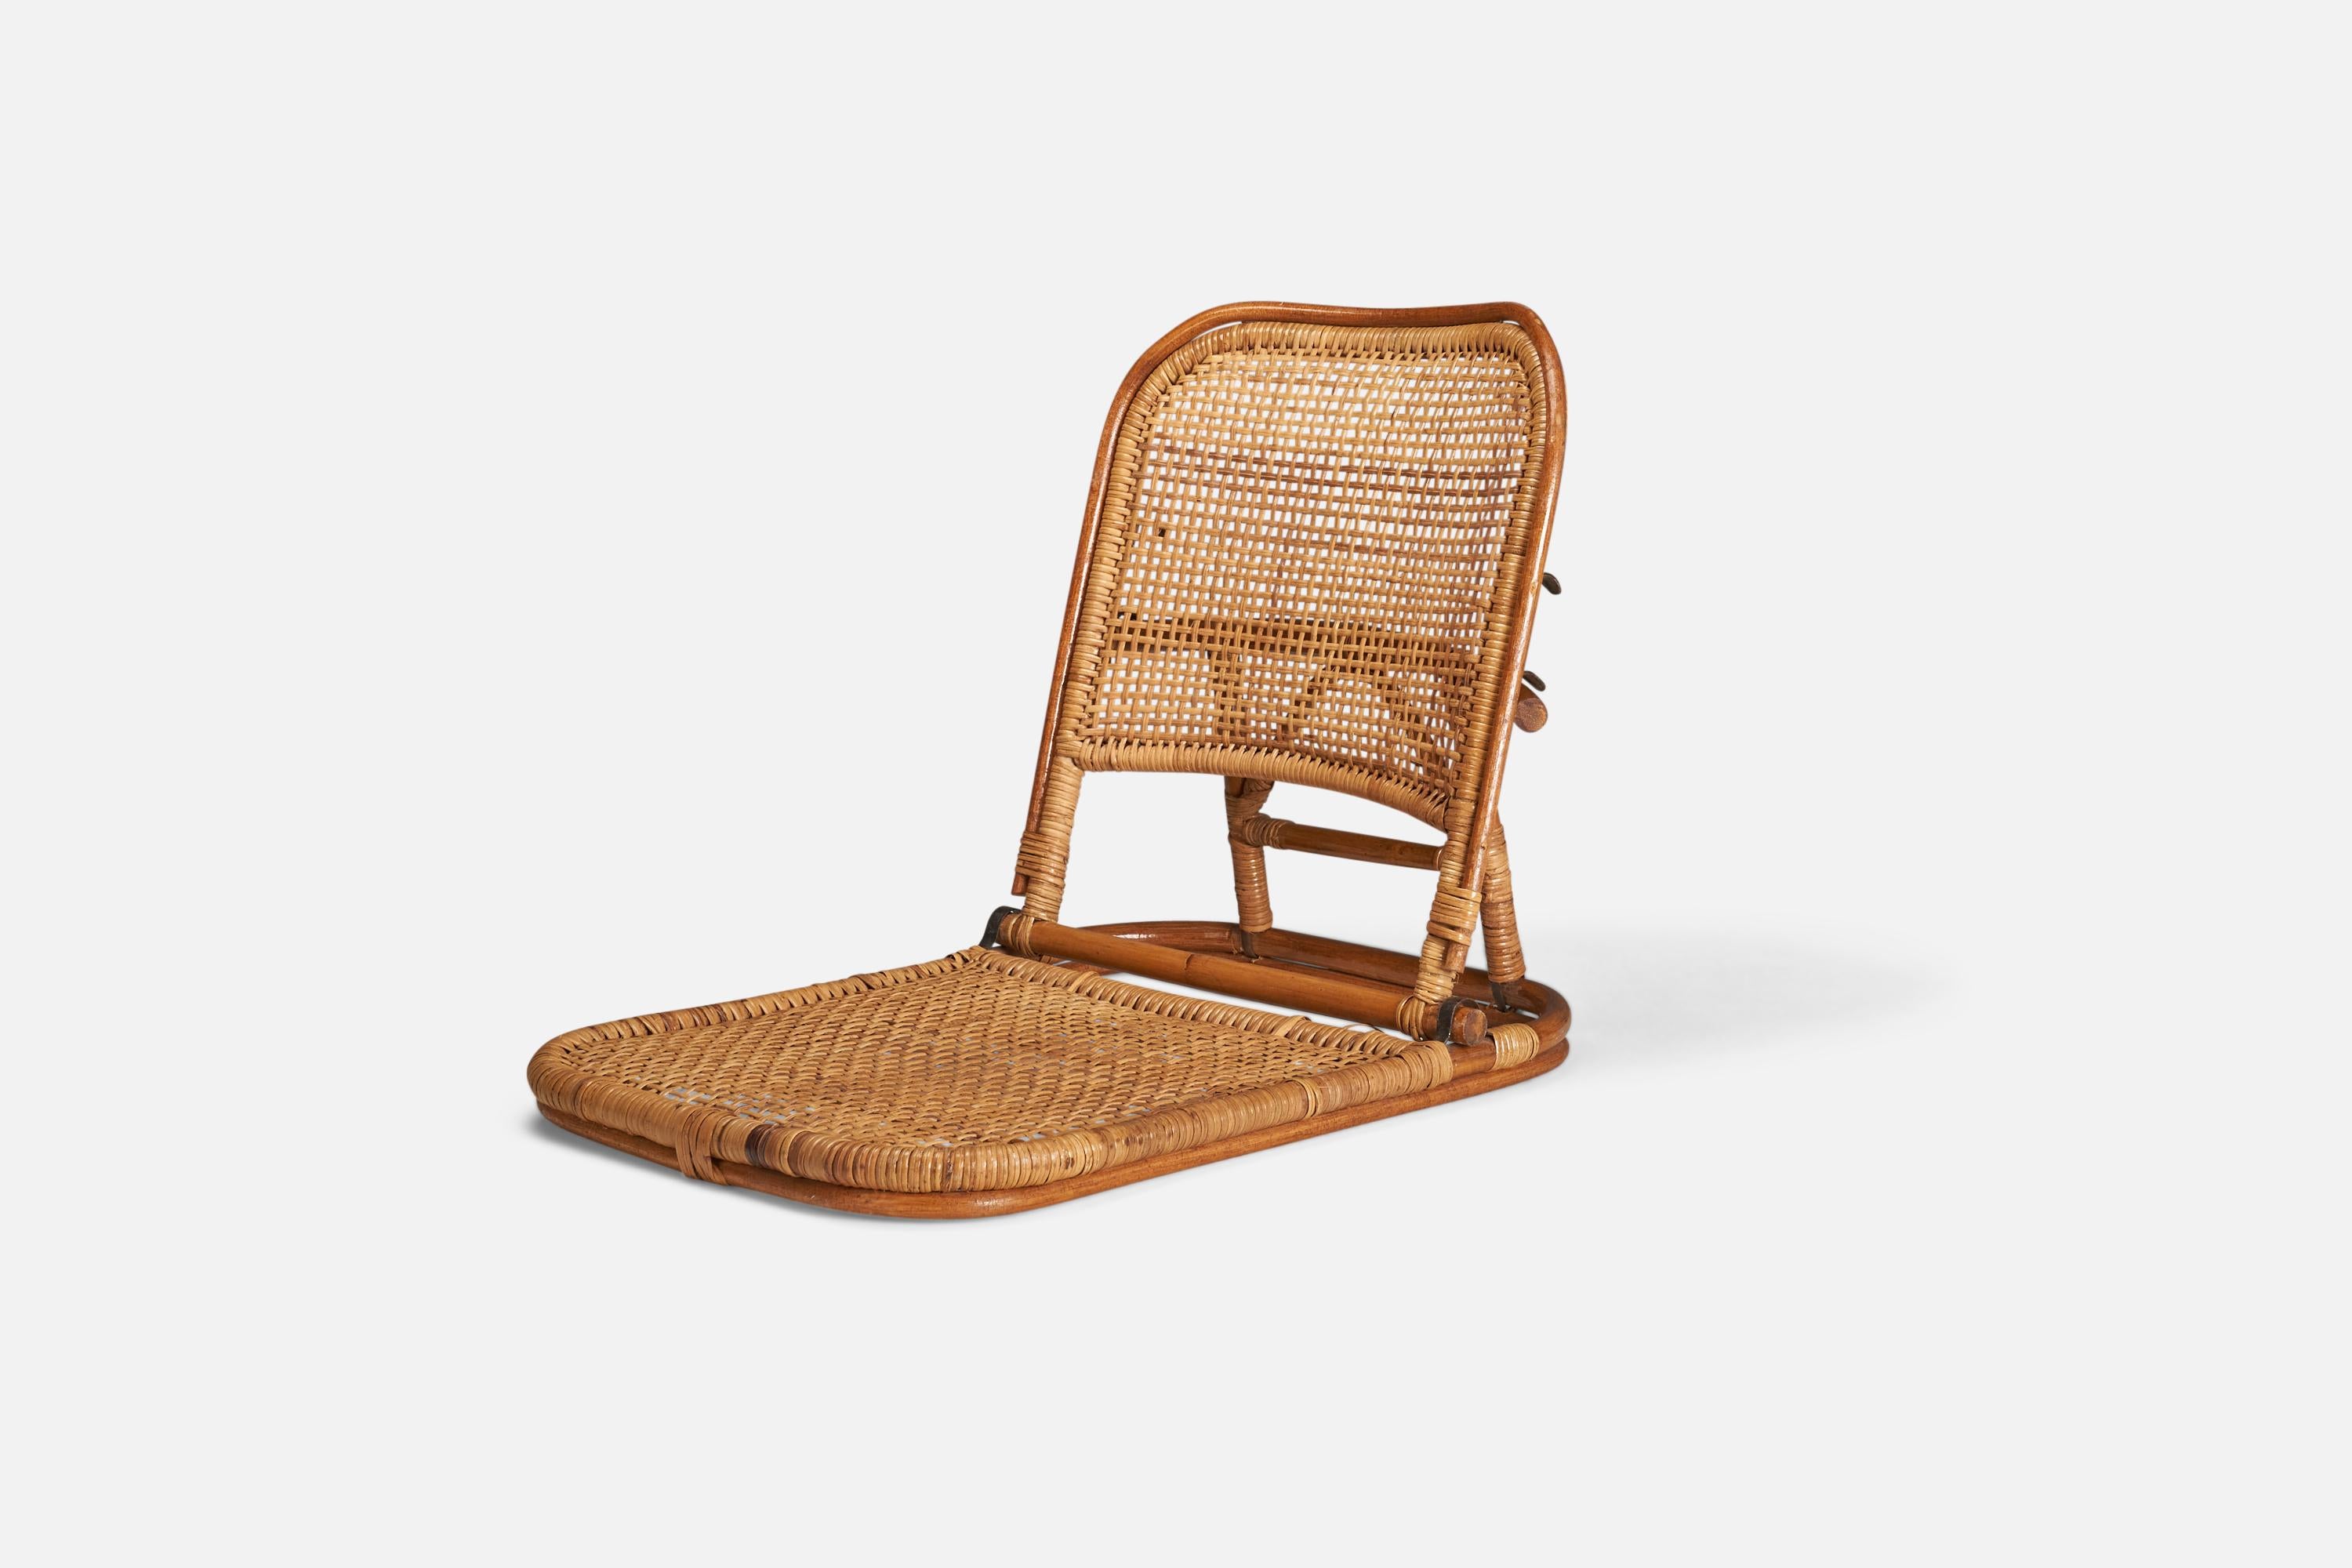 Mid-Century Modern American Designer, Lounge Chairs, Bamboo, Rattan, Metal, USA, 1950s For Sale